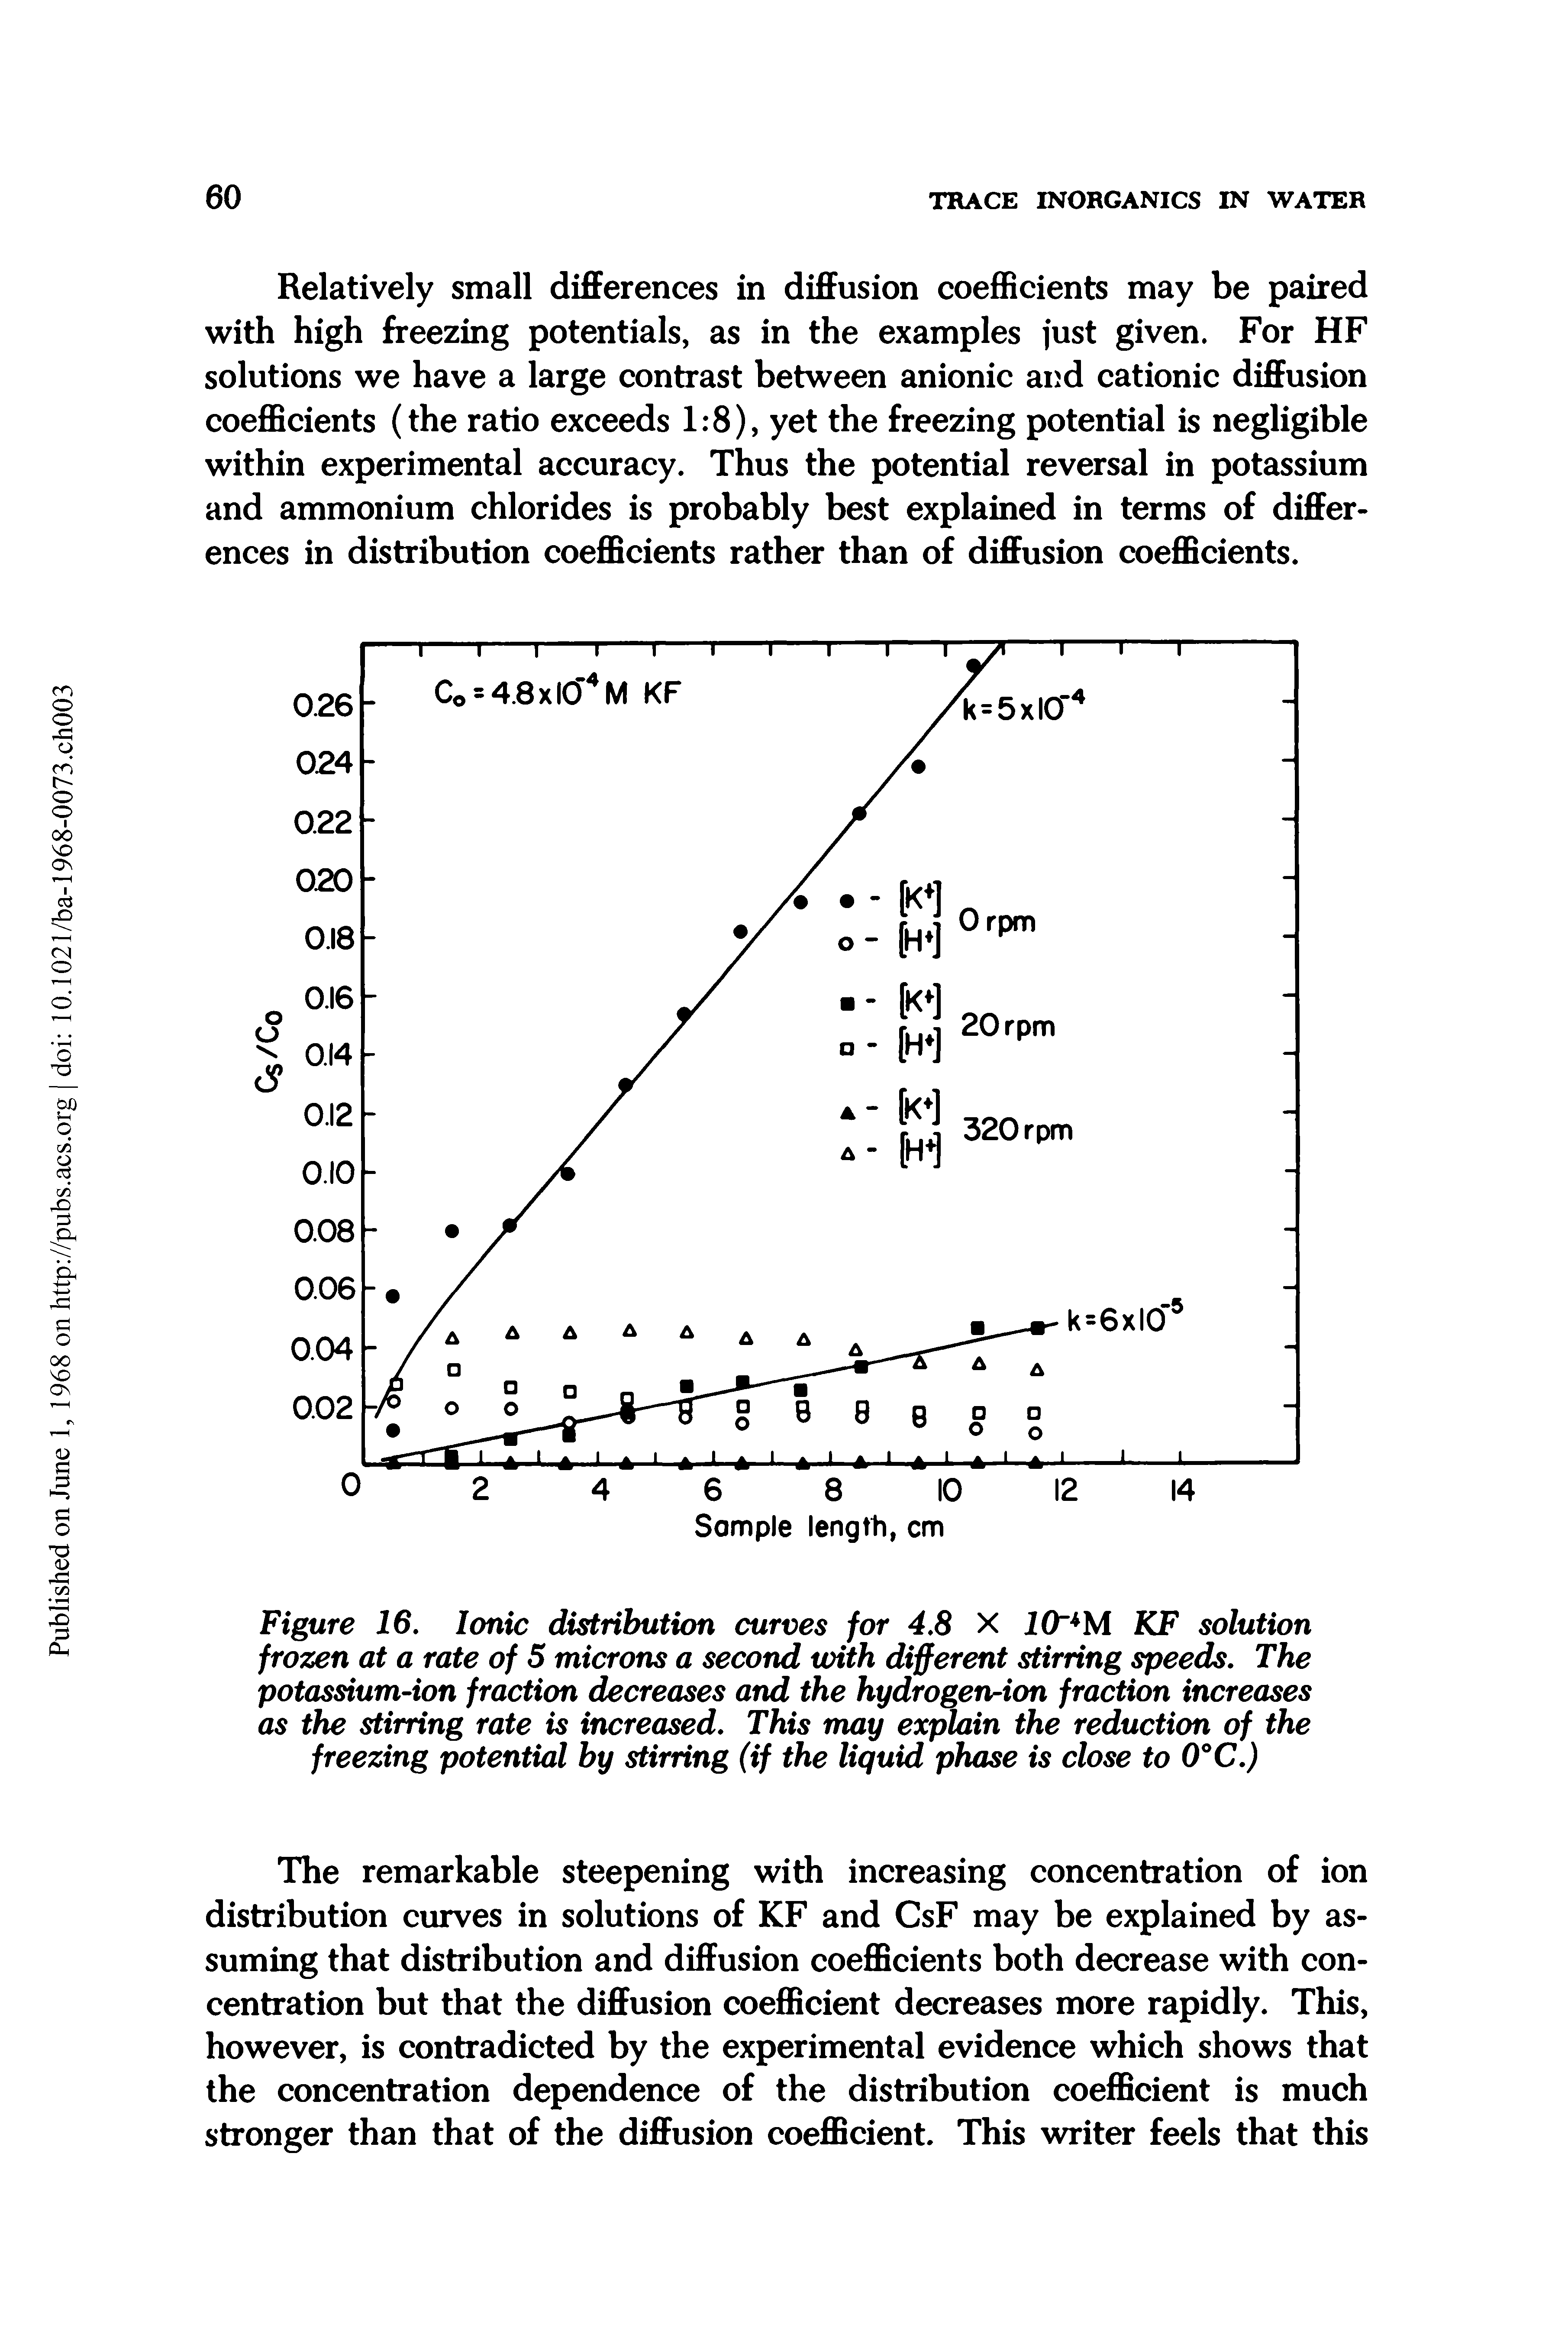 Figure 16. Ionic distribution curves for 4.8 X lOr M KF solution frozen at a rate of 5 microns a second with different stirring speeds. The potassium-ion fraction decreases and the hydrogen-ion fraction increases as the stirring rate is increased. This may explain the reduction of the freezing potential by stirring (if the liquid phase is close to 0°C.)...